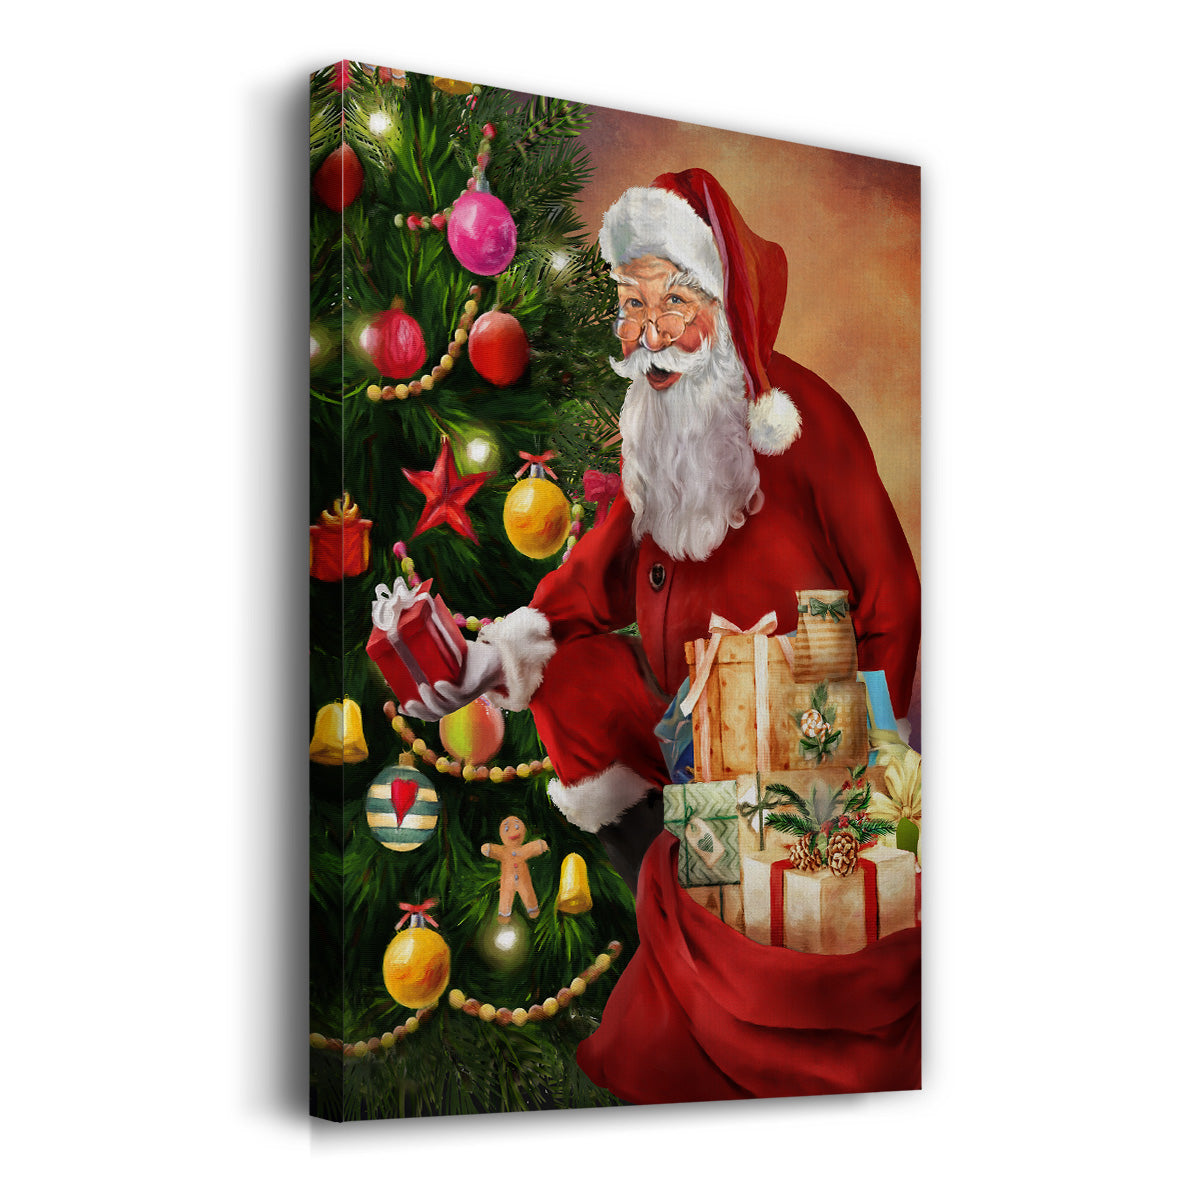 Santa's Presents - Gallery Wrapped Canvas